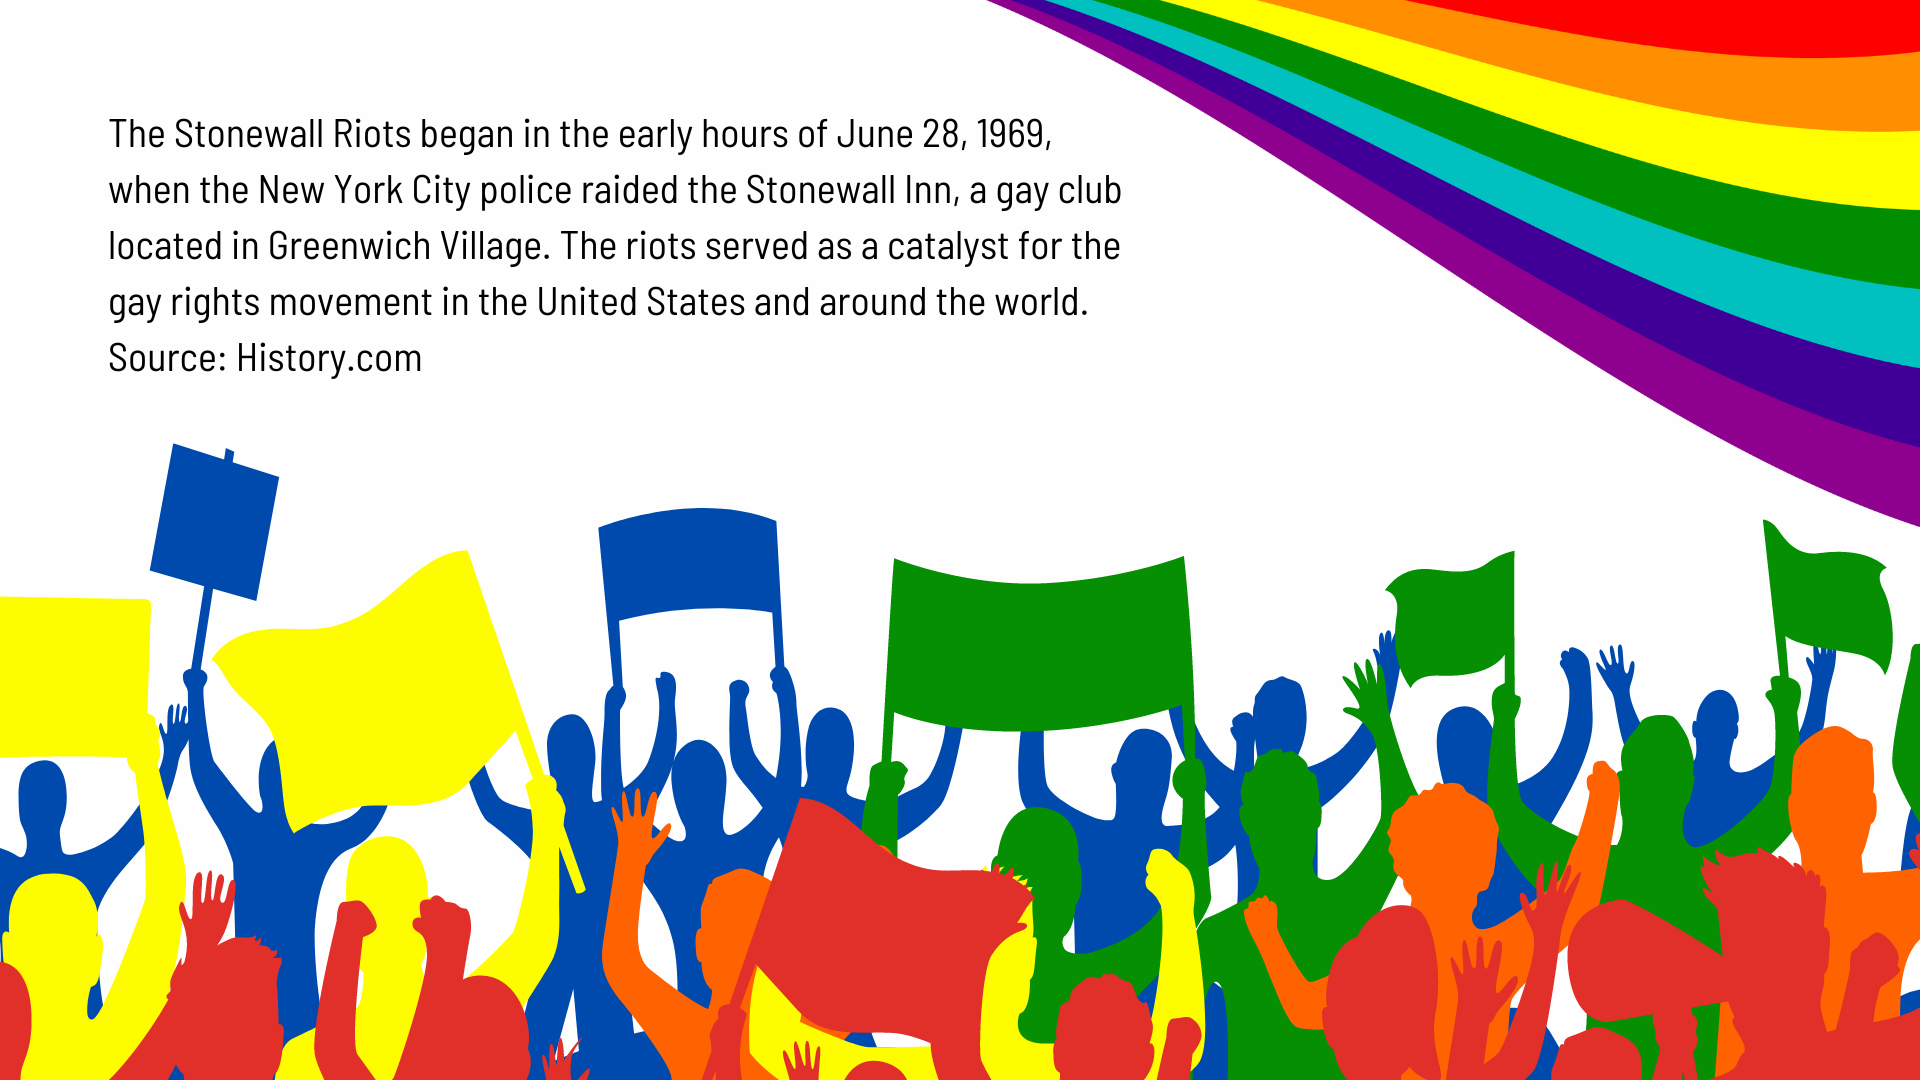 The Stonewall Riots began in the early hours of June 28, 1969, when New York City police raided the Stonewall Inn, a gay club located in Greenwich Village in New York City. The riots served as a catalyst for the gay rights movement in the United States and around the world. 